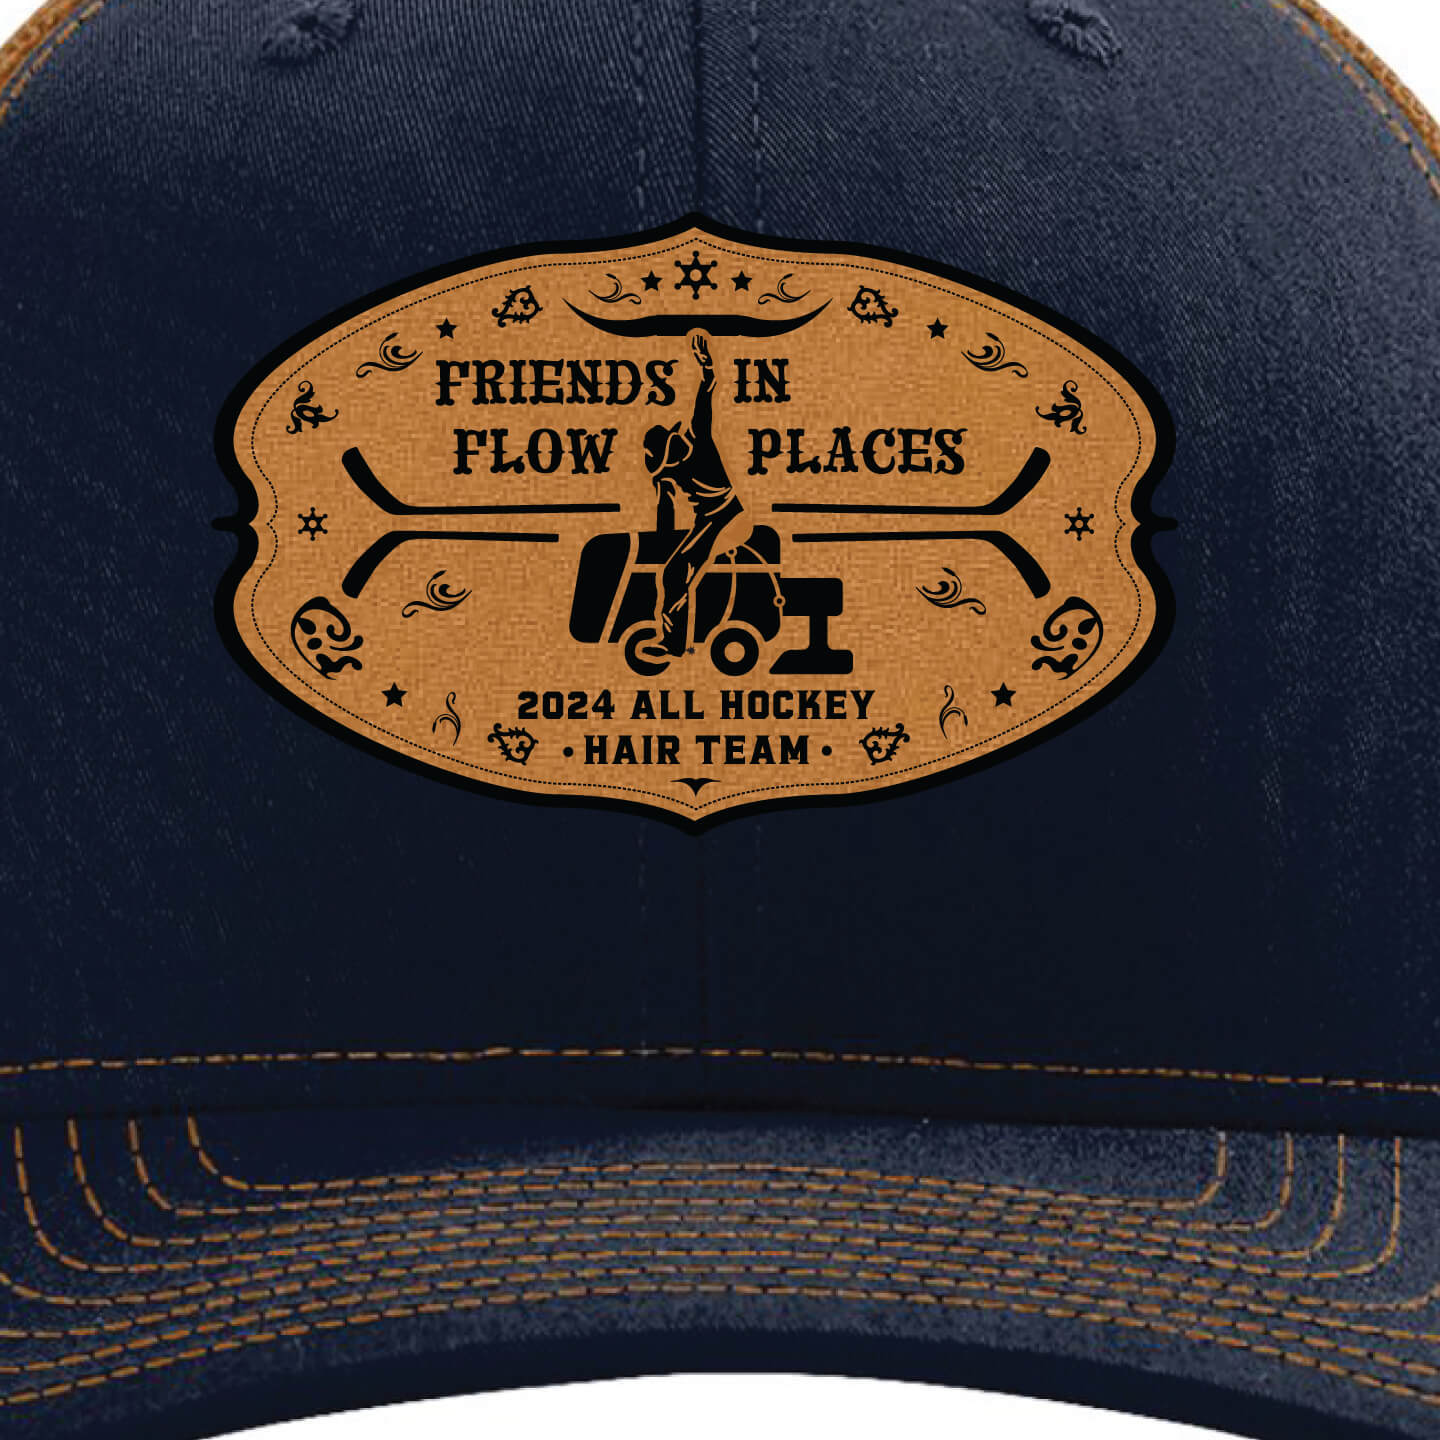 Richarson 112 Snapback Trucker Hat with Friends in Flow Places patch